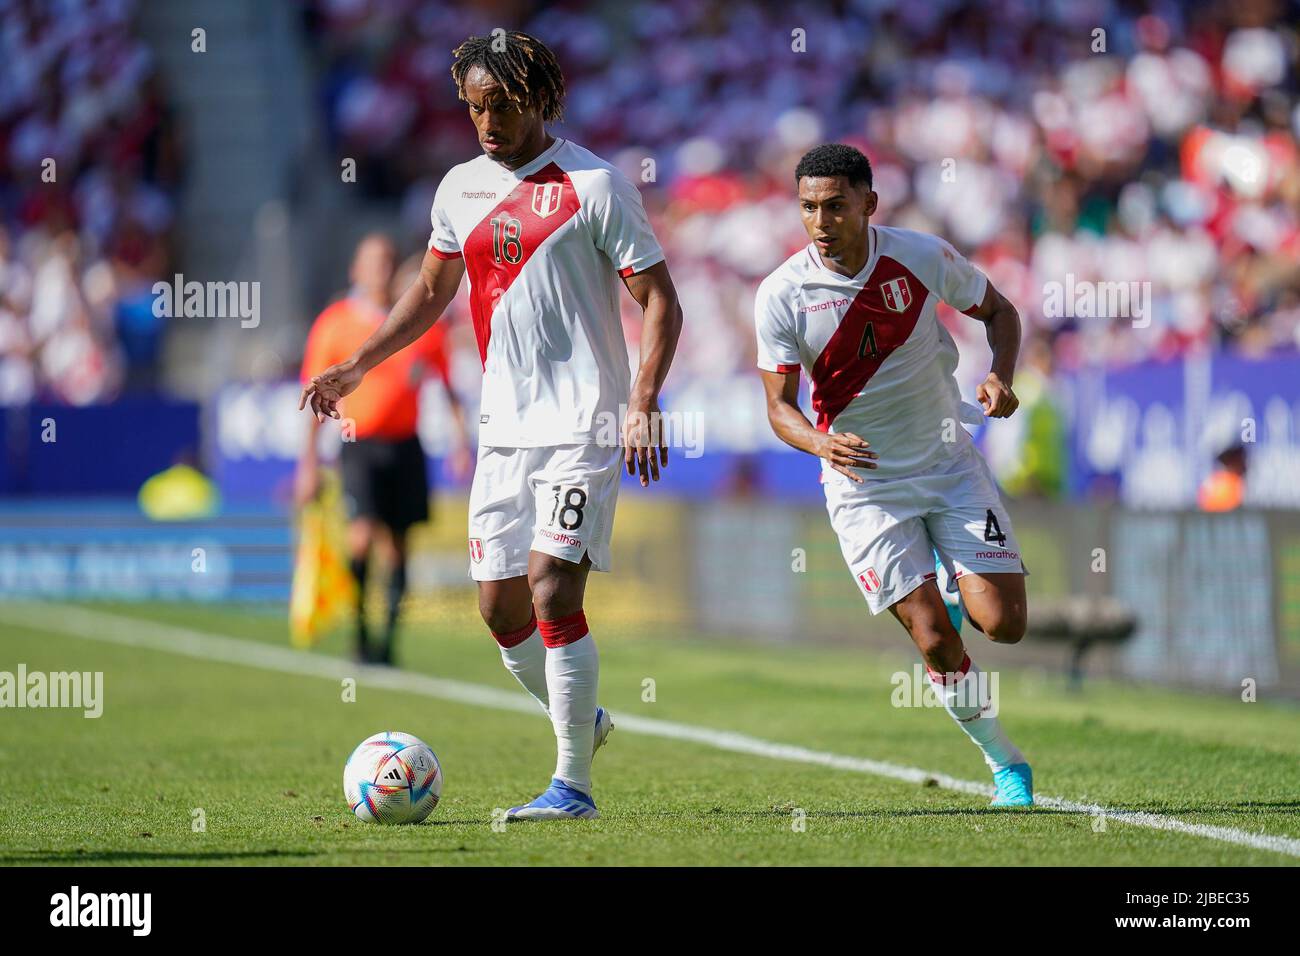 Barcelona, Spain. June 5, 2022, Andre Carillo and Marcos Lopez of Peru during the friendly match between Peru and New Zealand played at RCDE Stadium on June 5, 2022 in Barcelona, Spain. (Photo by Bagu Blanco / PRESSINPHOTO) Stock Photo